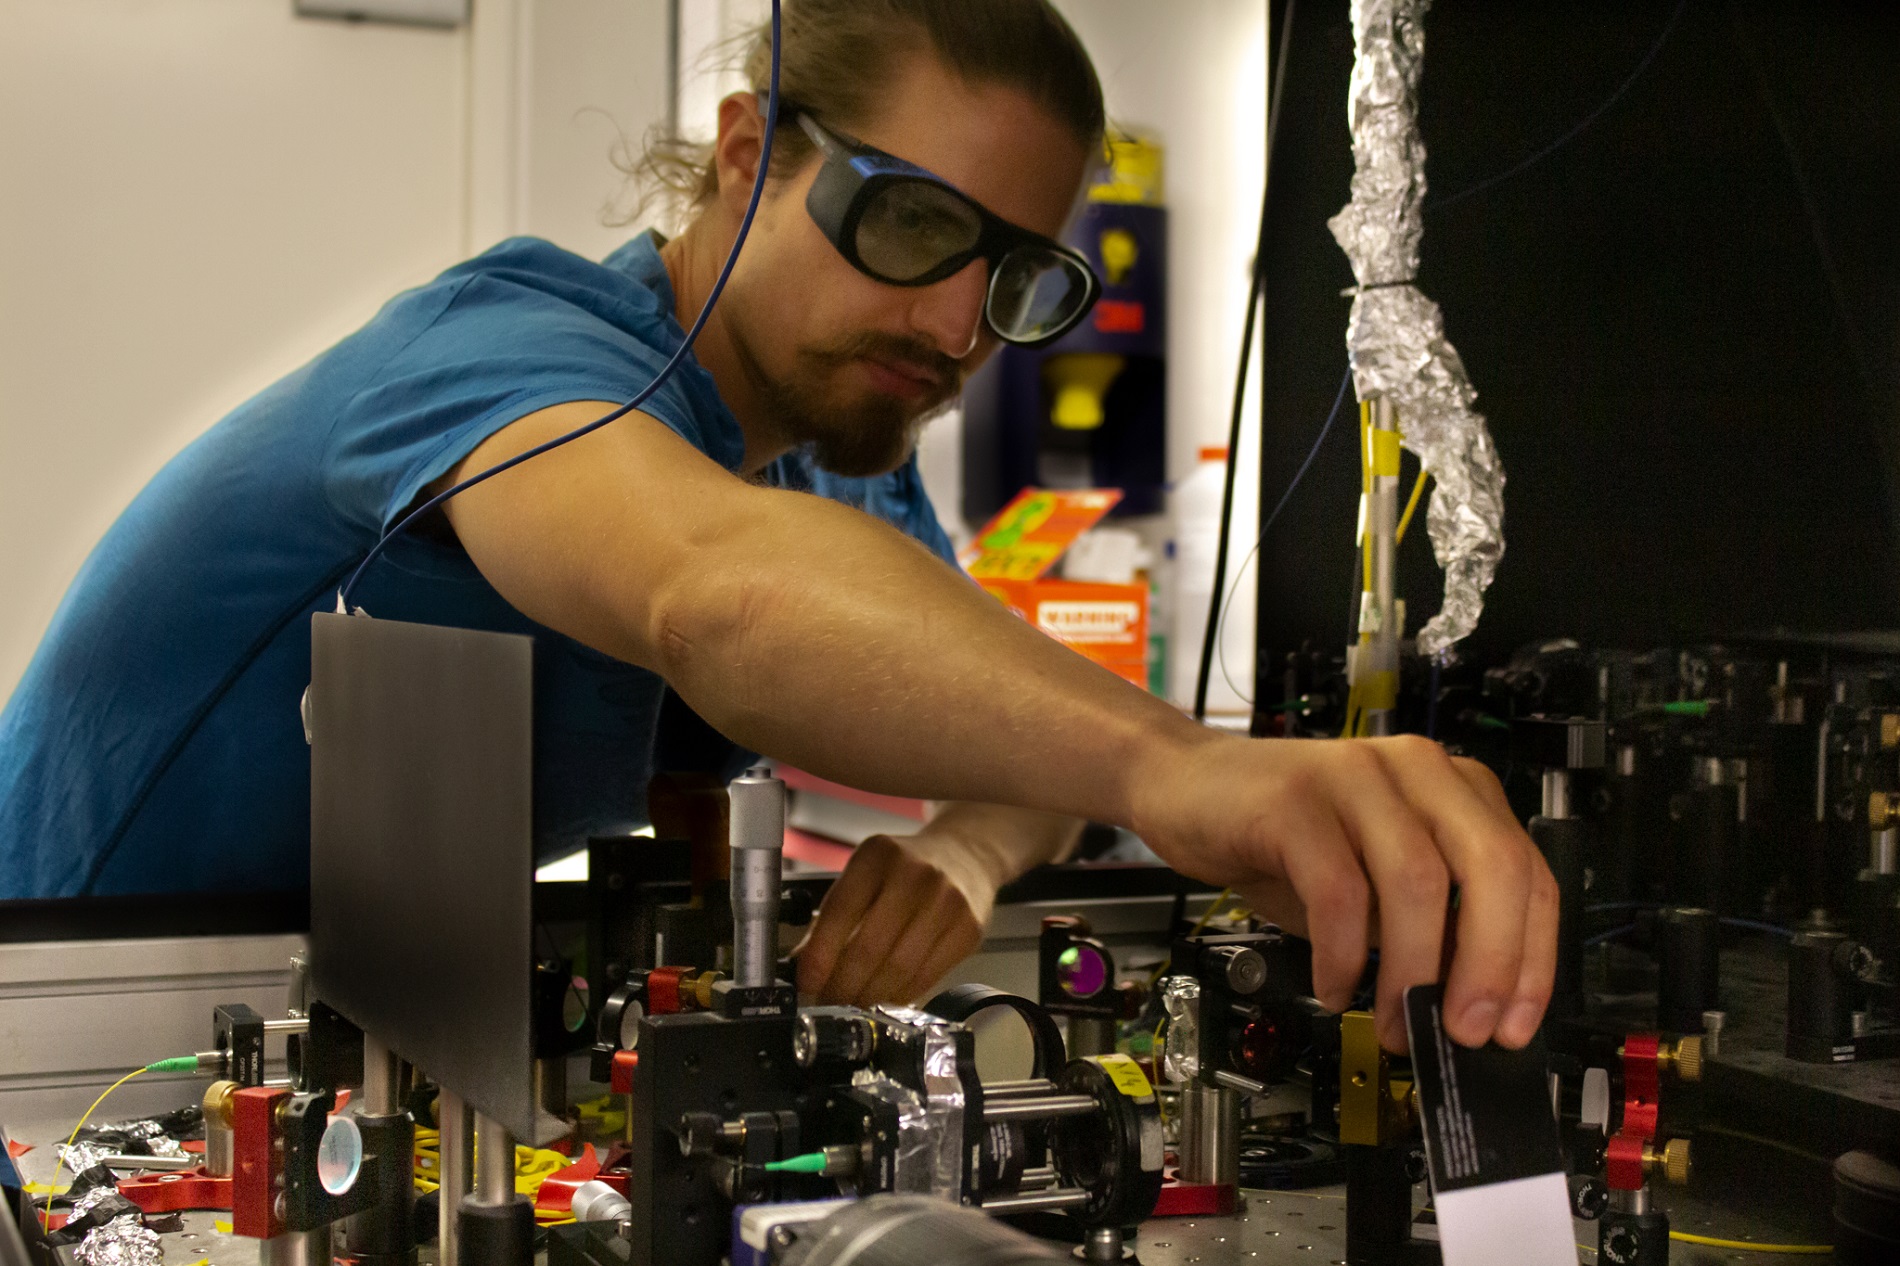 Jakob Rieser works on the experiment that showed non-reciprocal optical interaction between two optically trapped nanoparticles